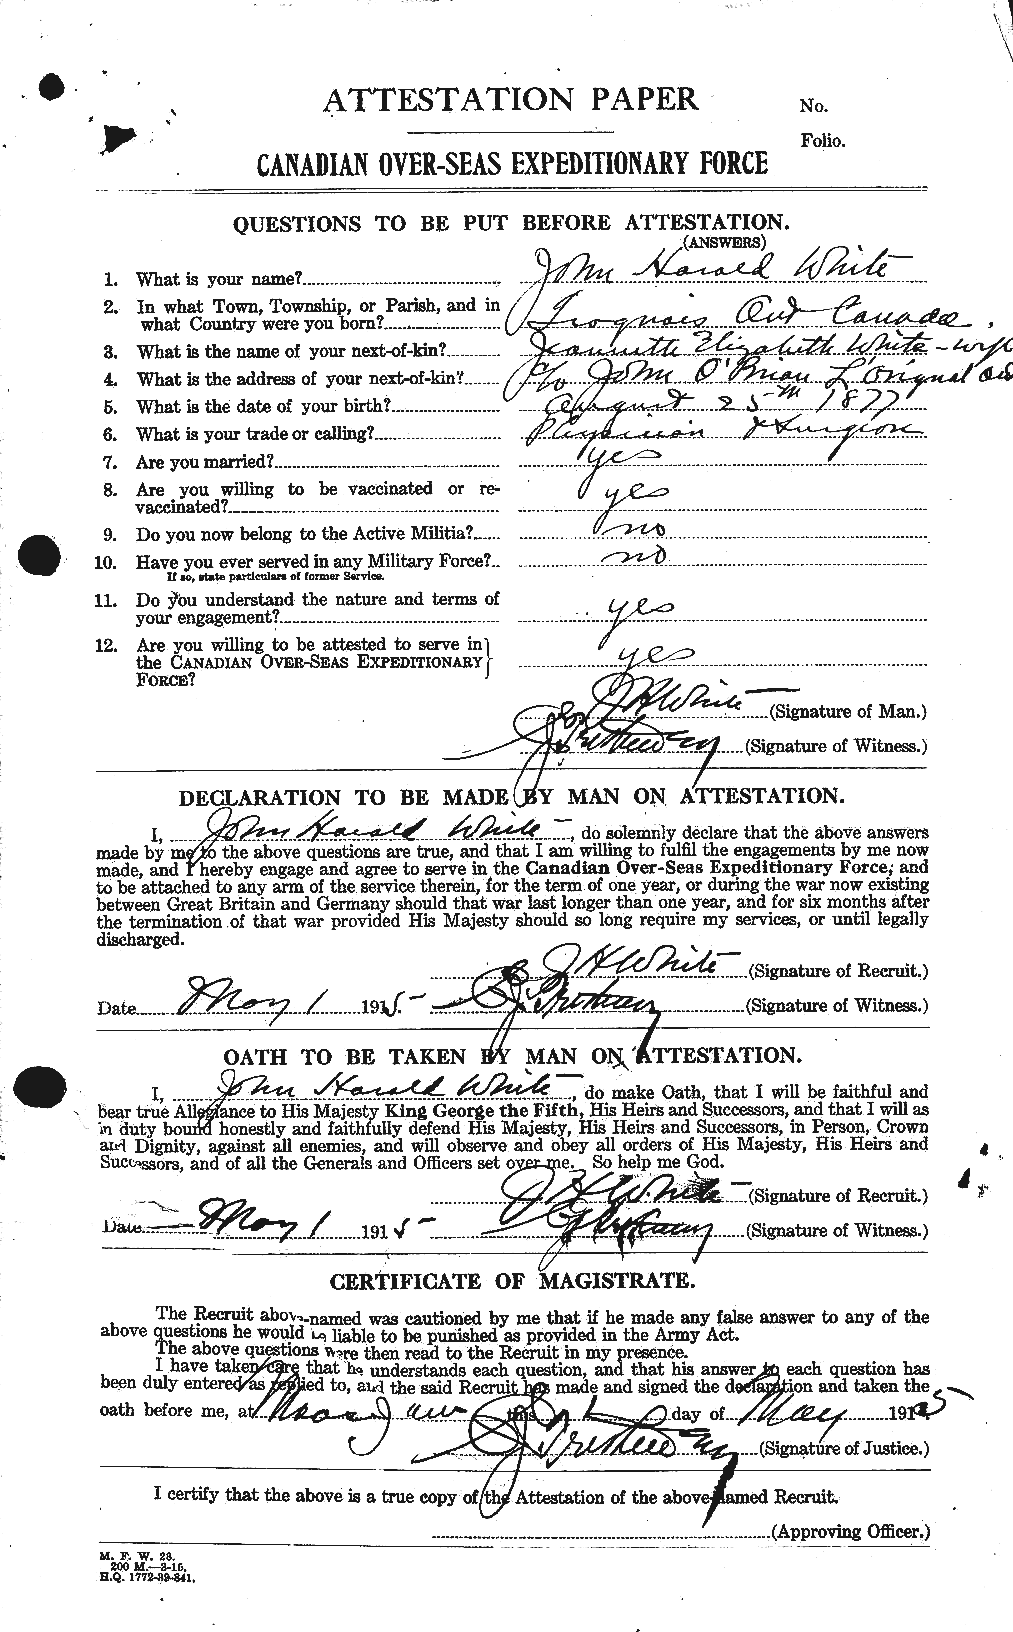 Personnel Records of the First World War - CEF 671565a